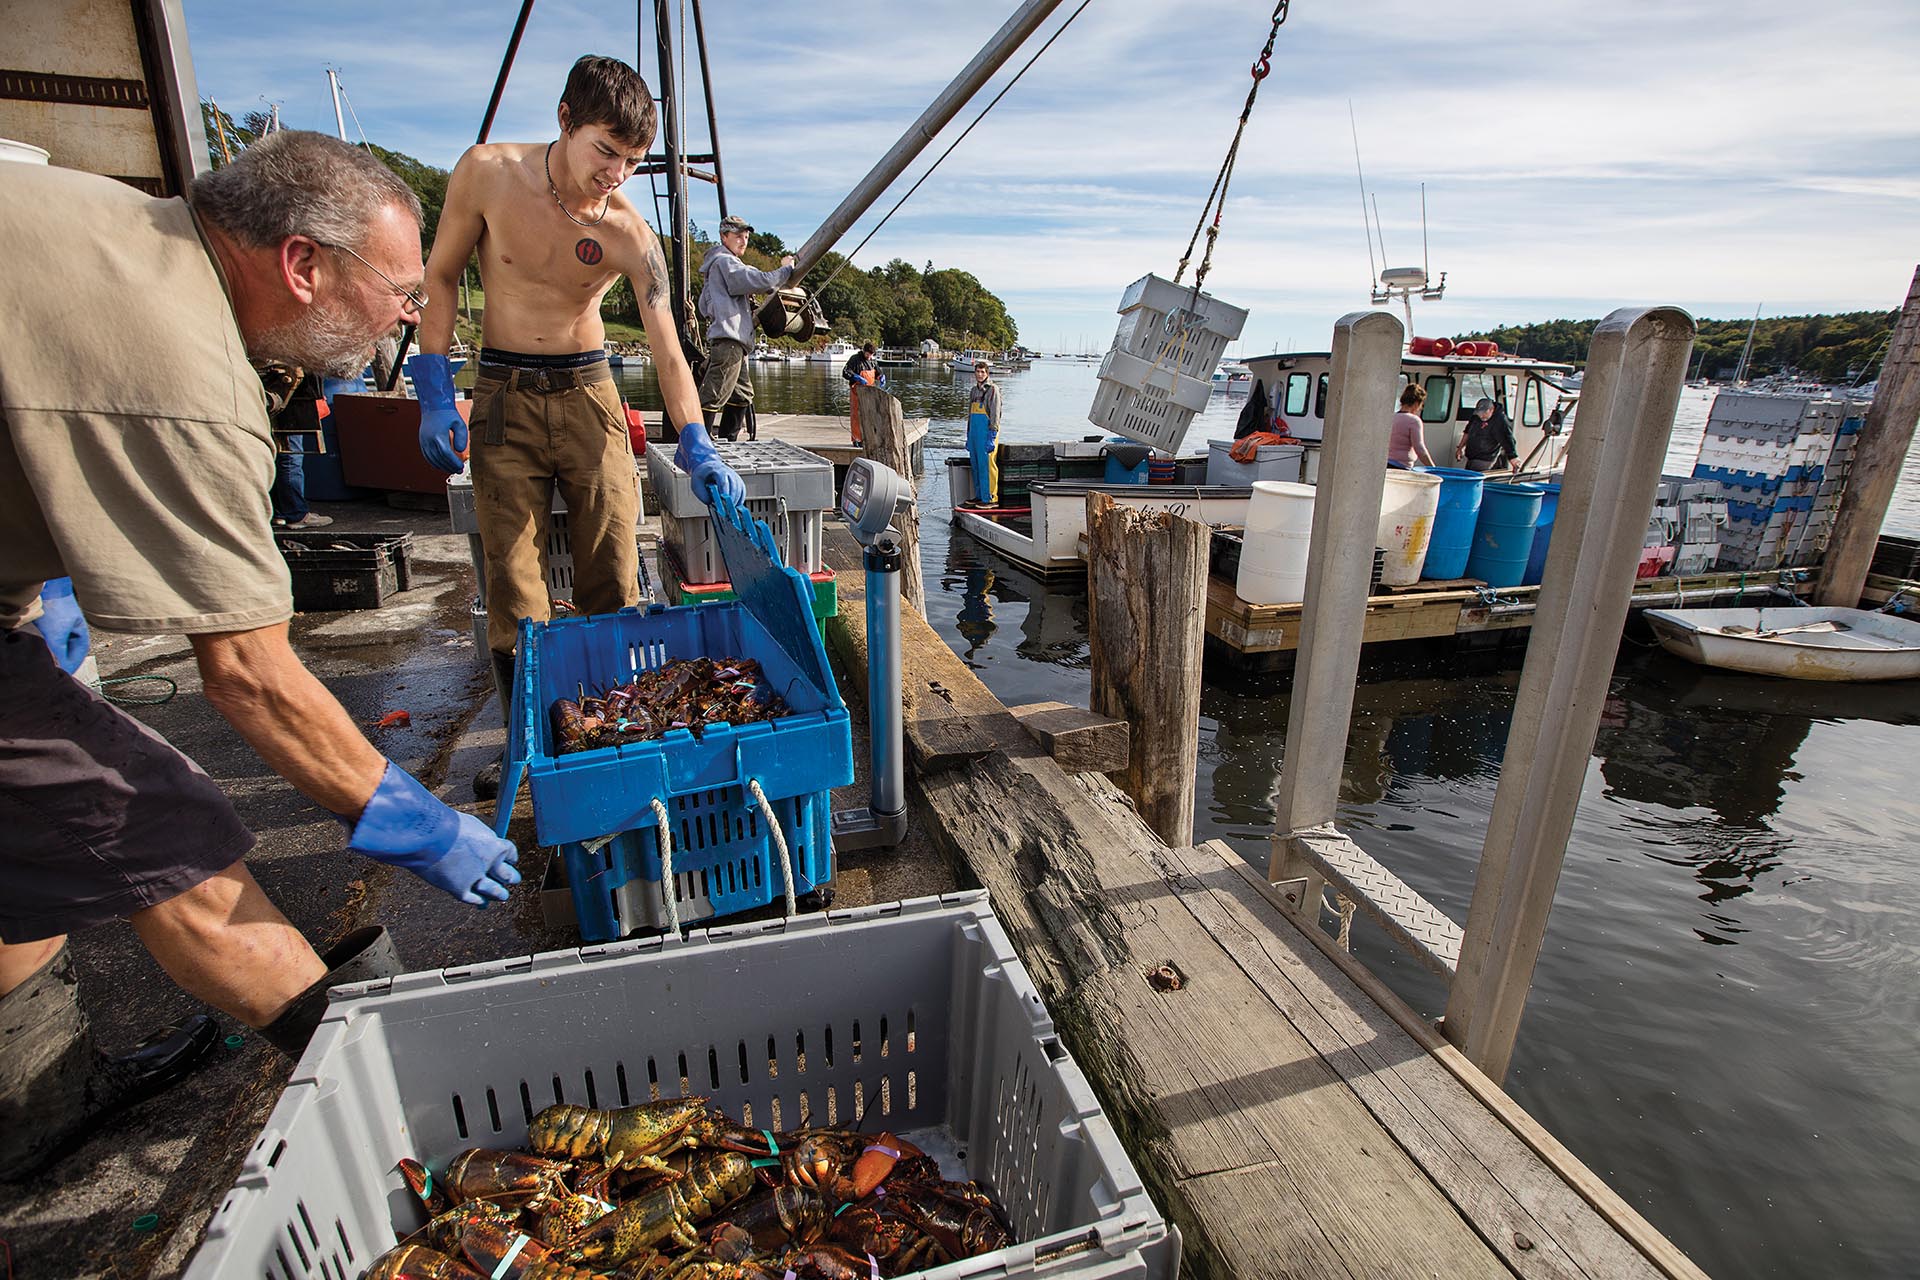 Food Movers: Chasing Maine Lobsters